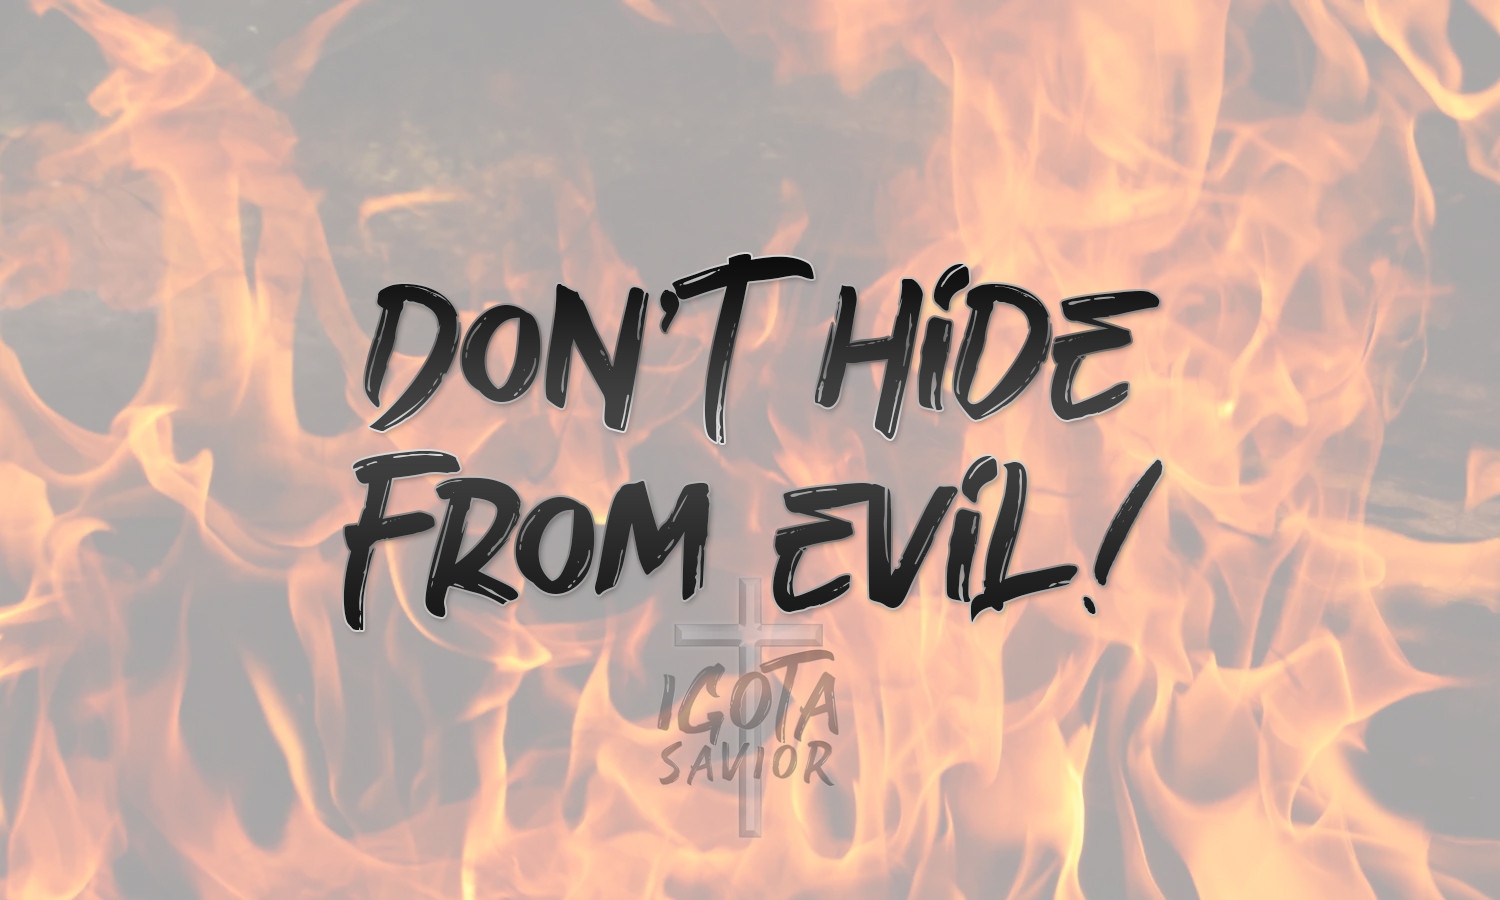 Don't Hide From Evil!